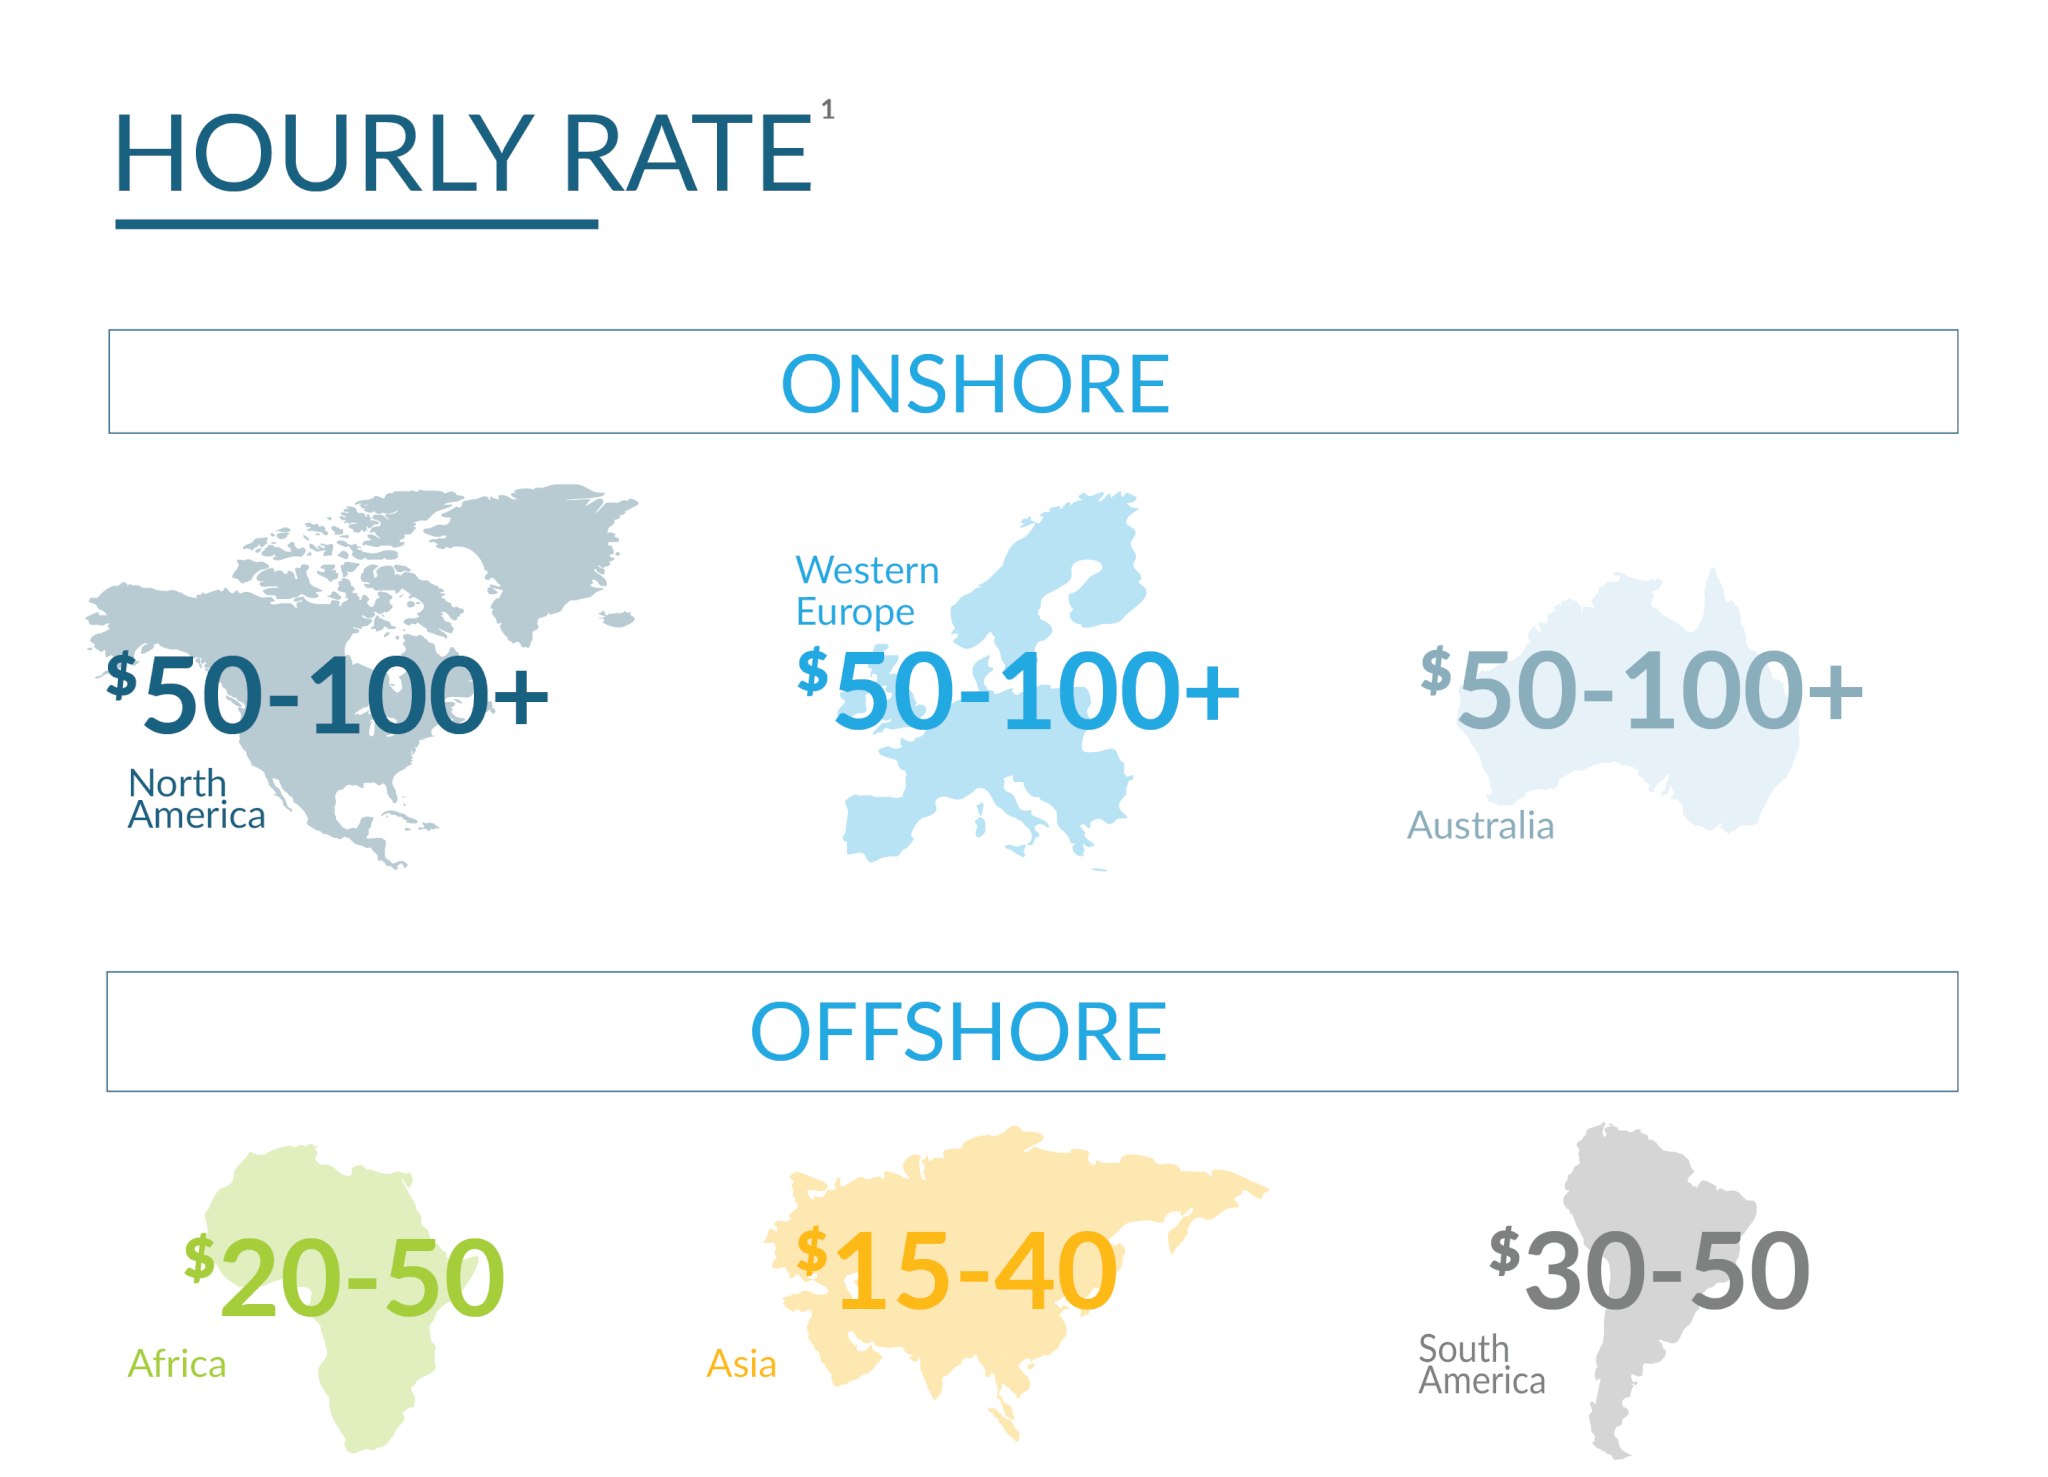 To understand outsourcing benefits, this image compares average hourly rates for onshore developers and testers ($50-100 for North America, Western Europe, and Australia) to average offshore prices ($20-50 in Africa, $15-40 in Asia, $30-50 in South America).